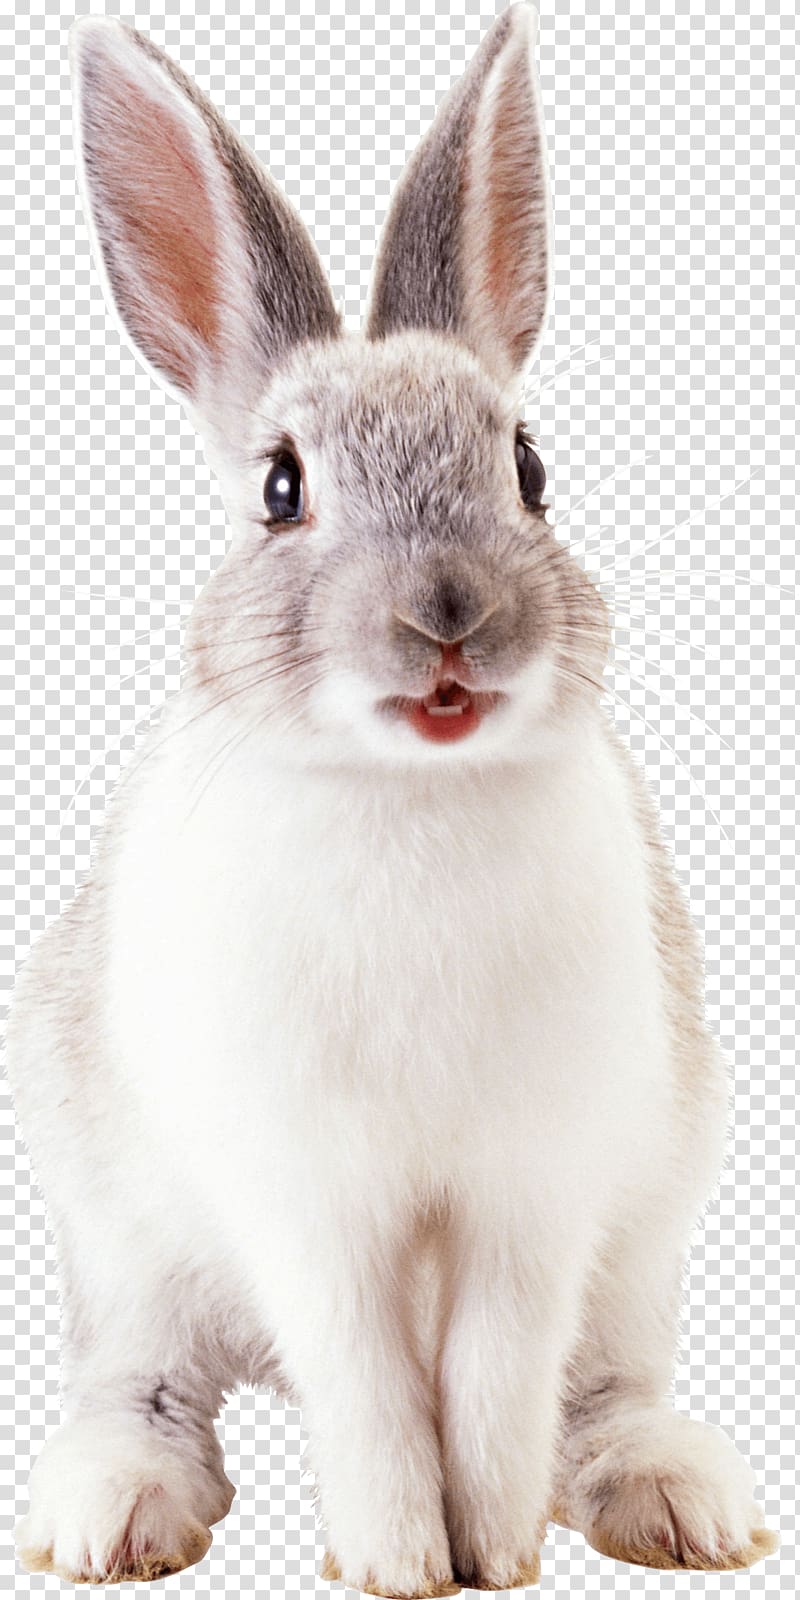 white and gray hare, Large Rabbit Head transparent background PNG clipart